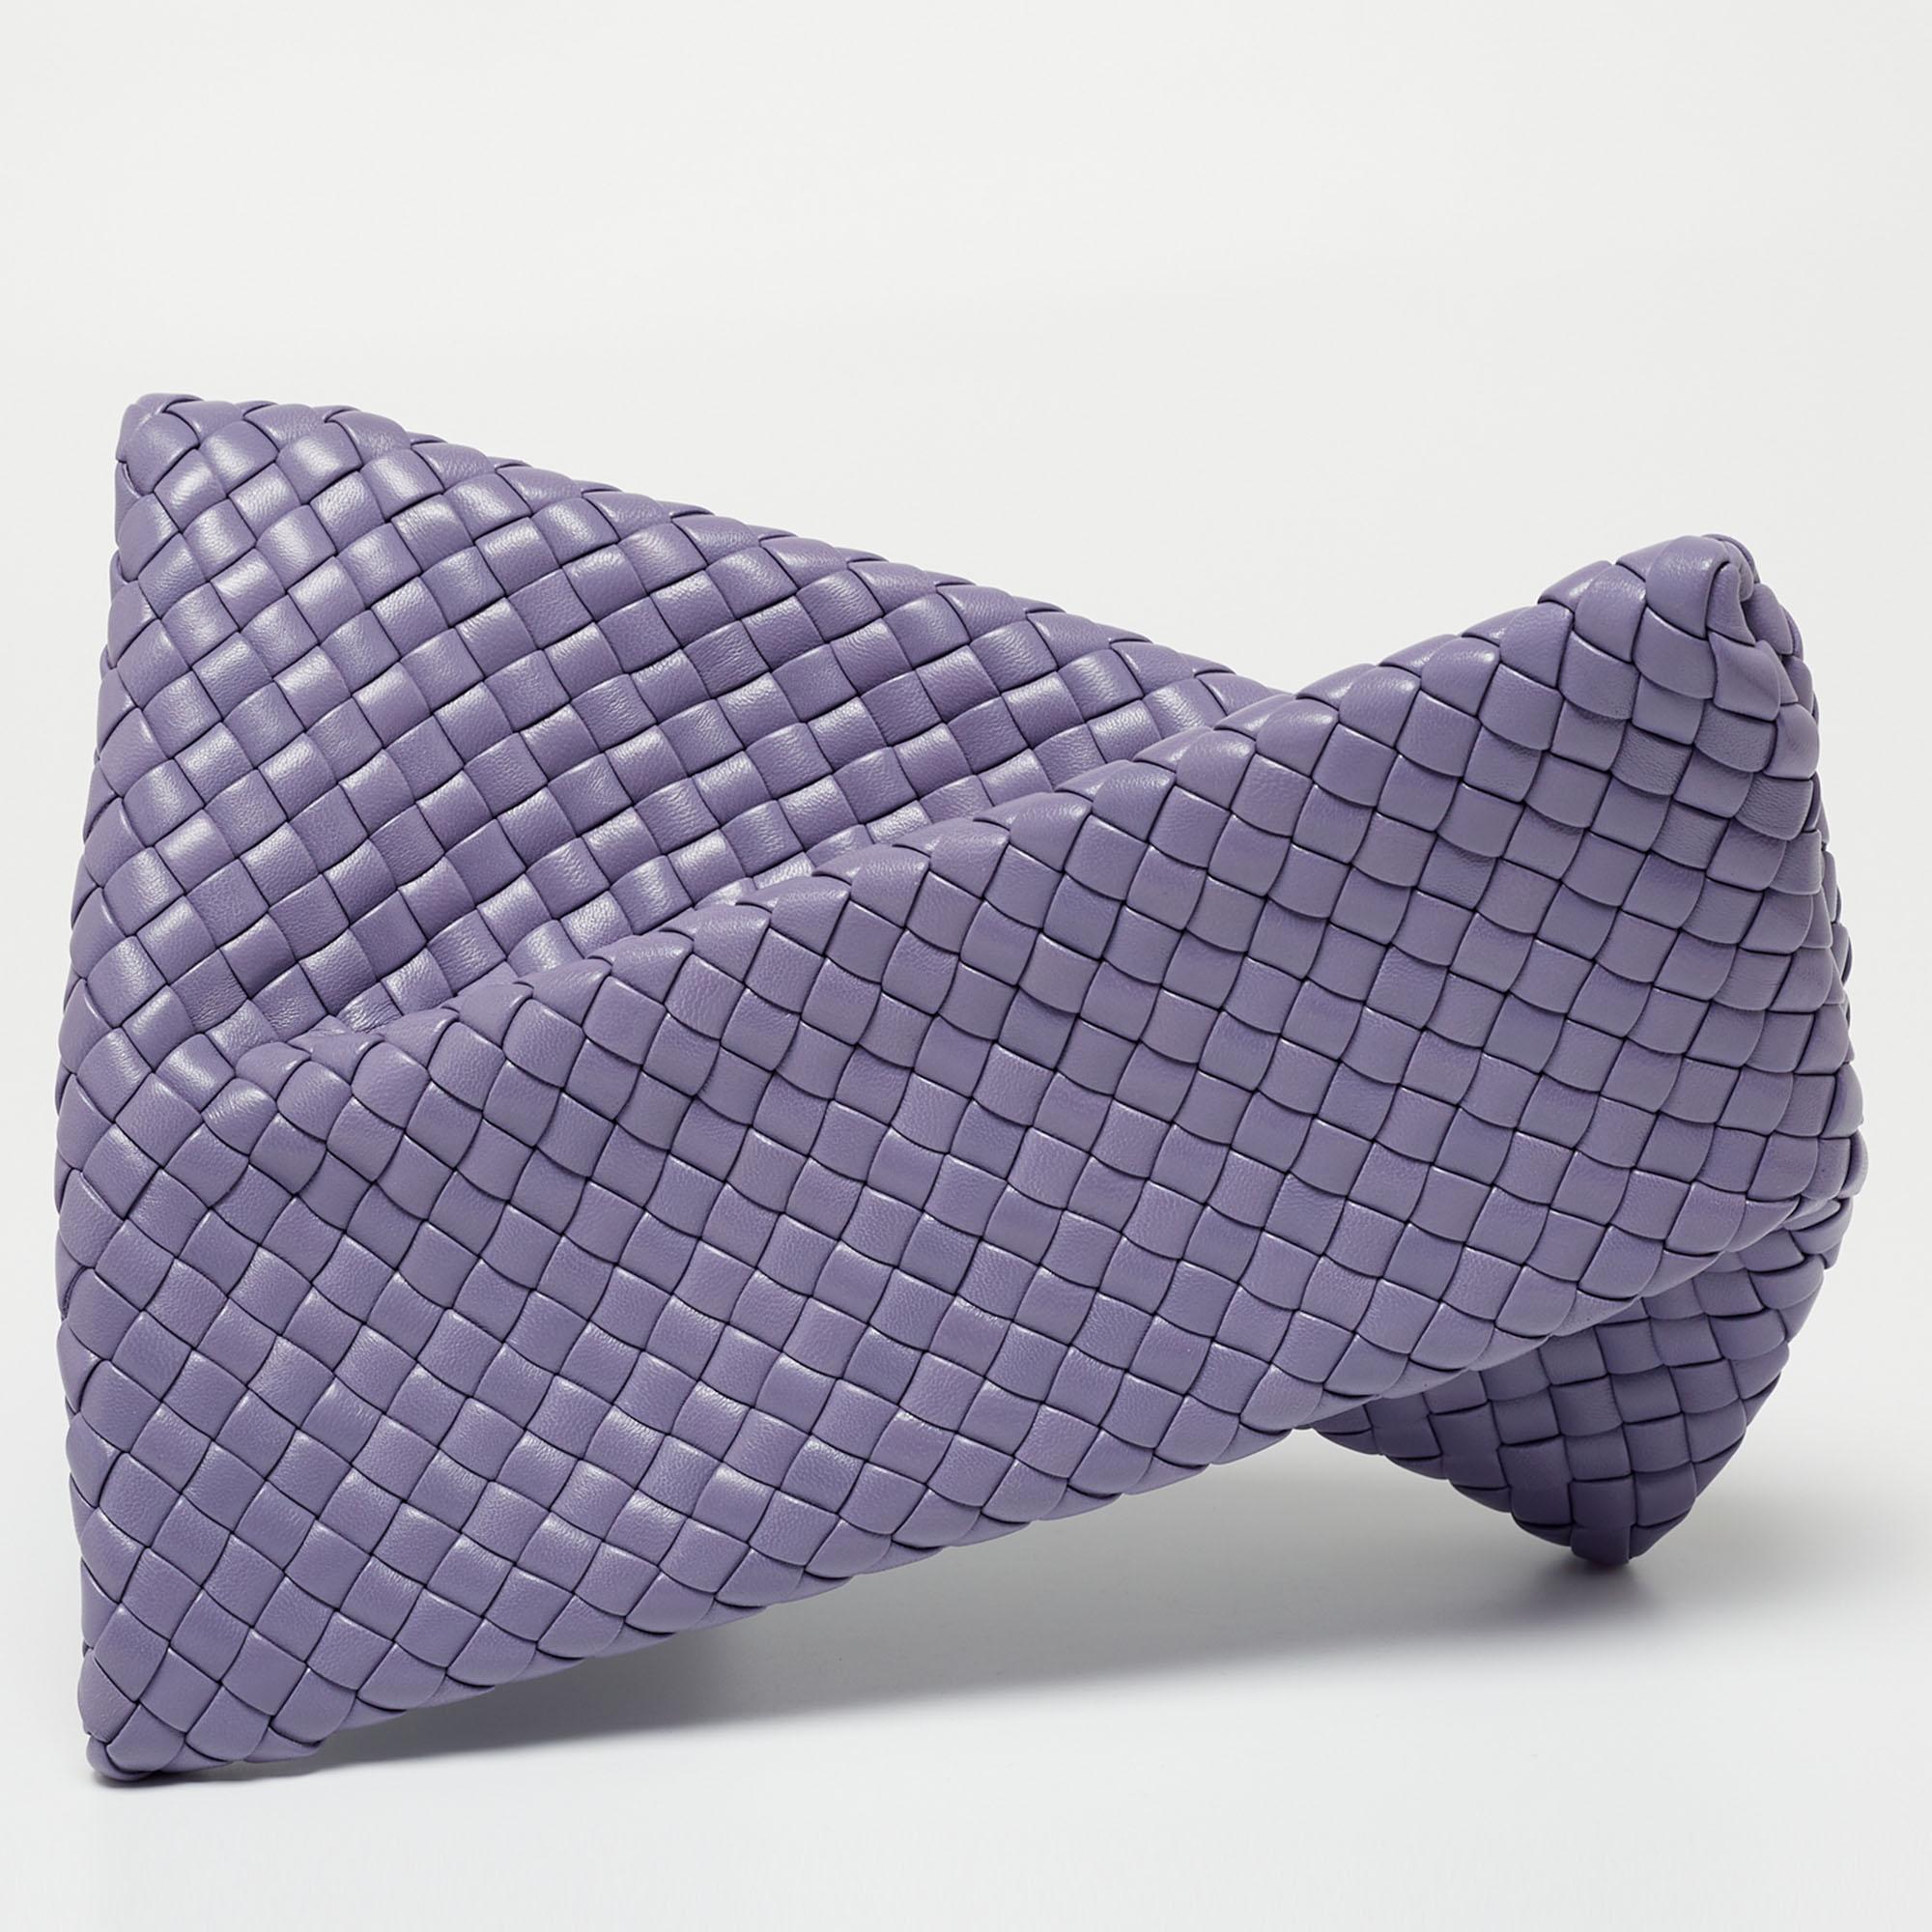 Playing with shapes, Bottega Veneta has created handbags that have enticed fashionistas around the world! One such is this criss-cross-shaped clutch made using leather in the Intrecciato weave. The pretty lavender hue gives the silhouette a feminine